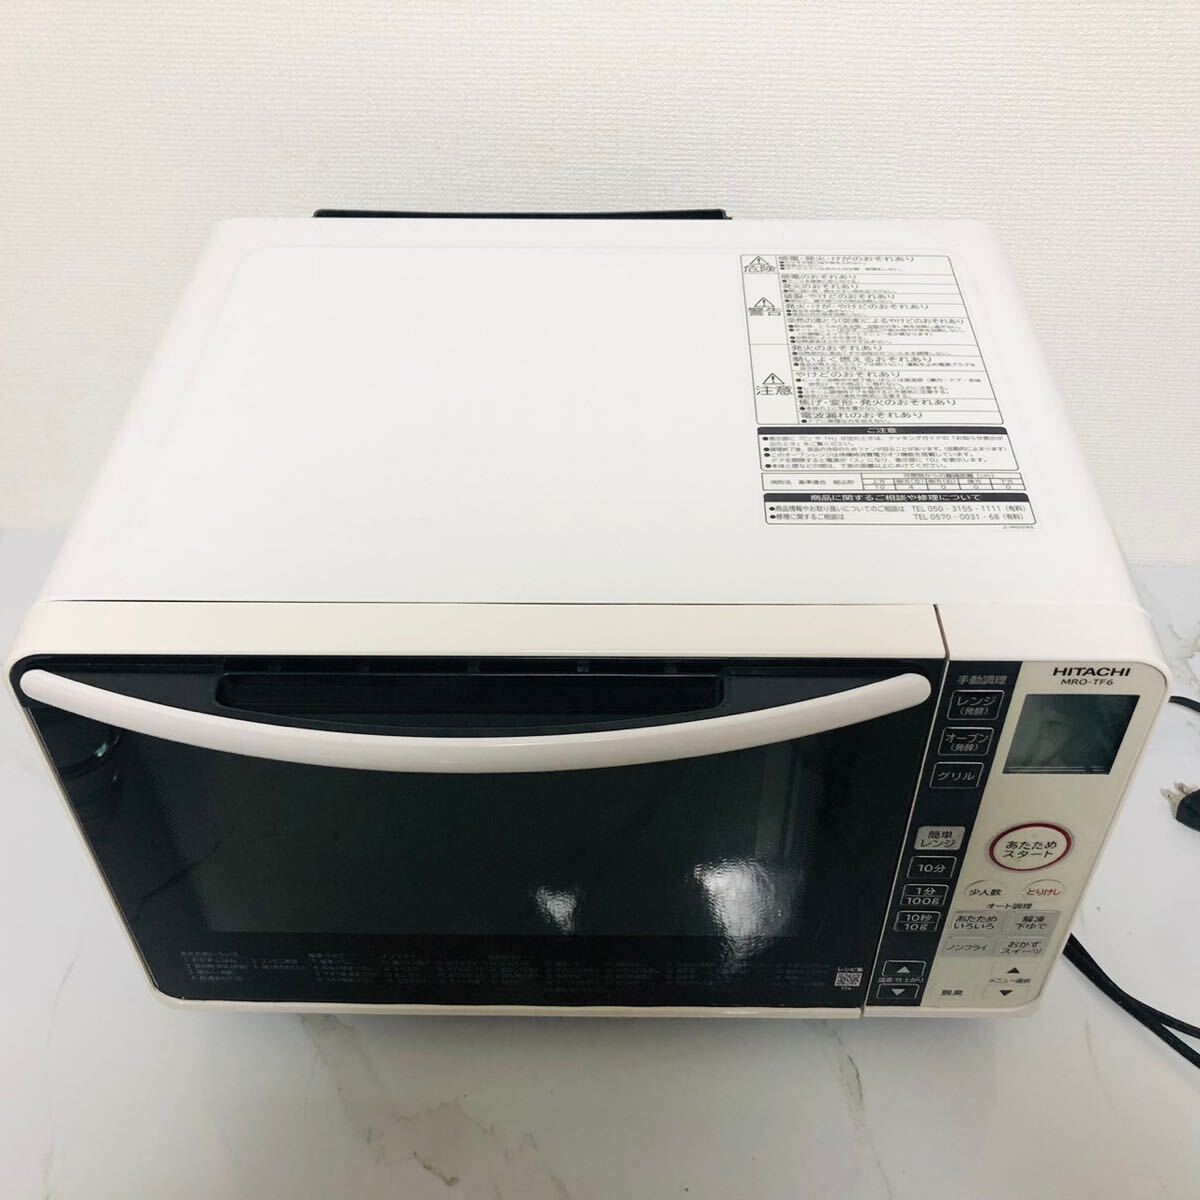 HITACHI microwave oven MRO-TF6 2018 year made consumer electronics microwave oven 